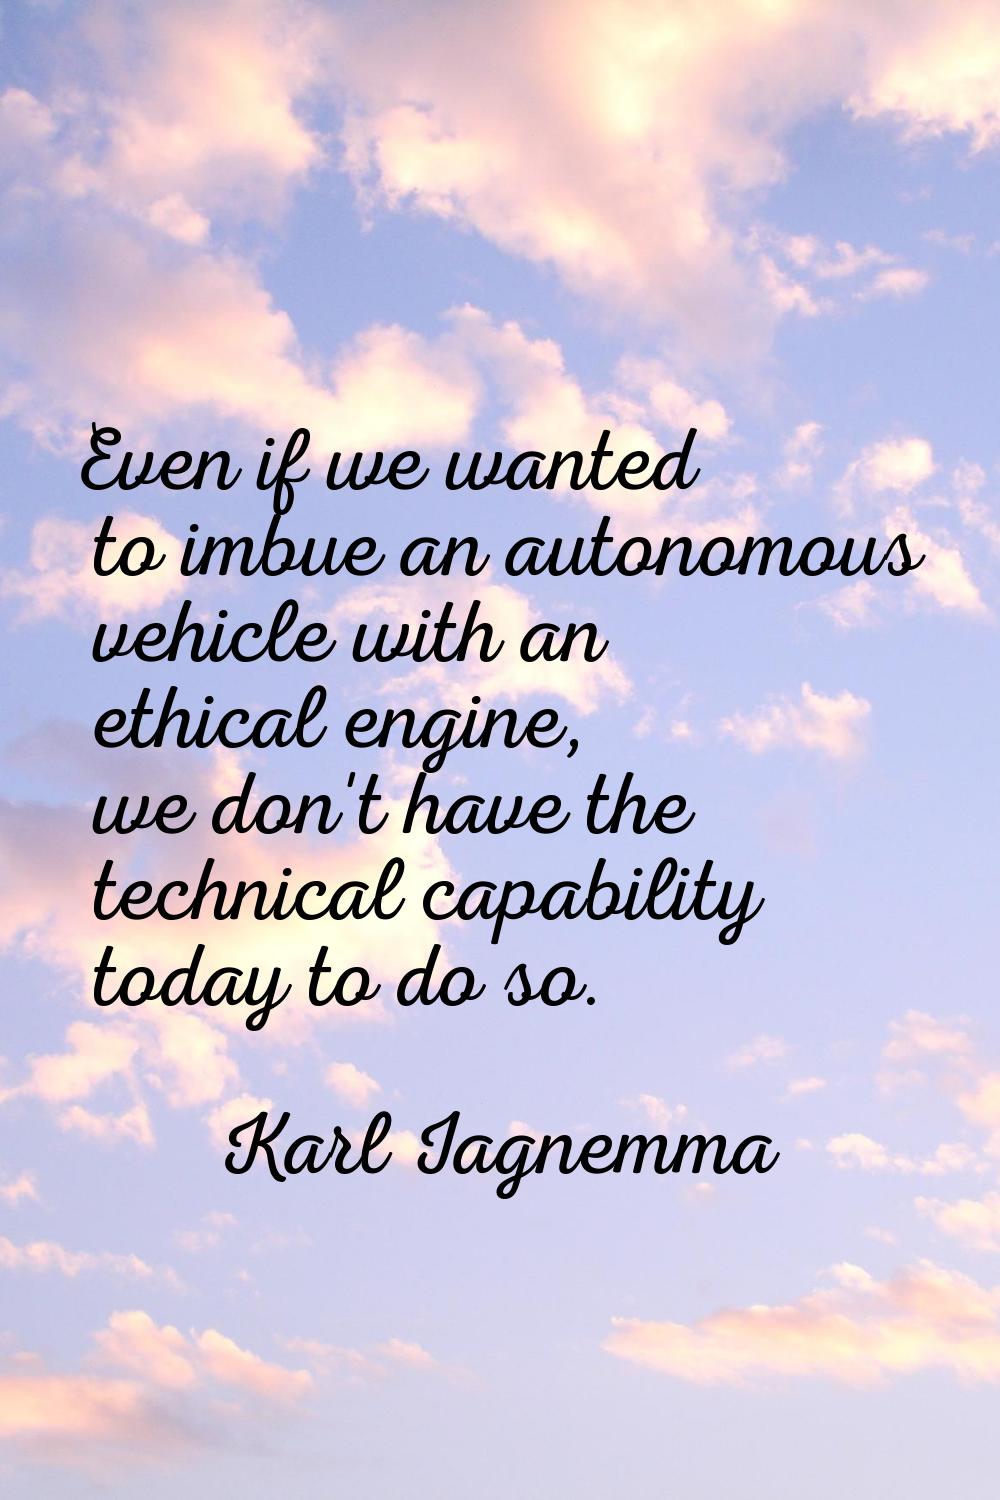 Even if we wanted to imbue an autonomous vehicle with an ethical engine, we don't have the technica